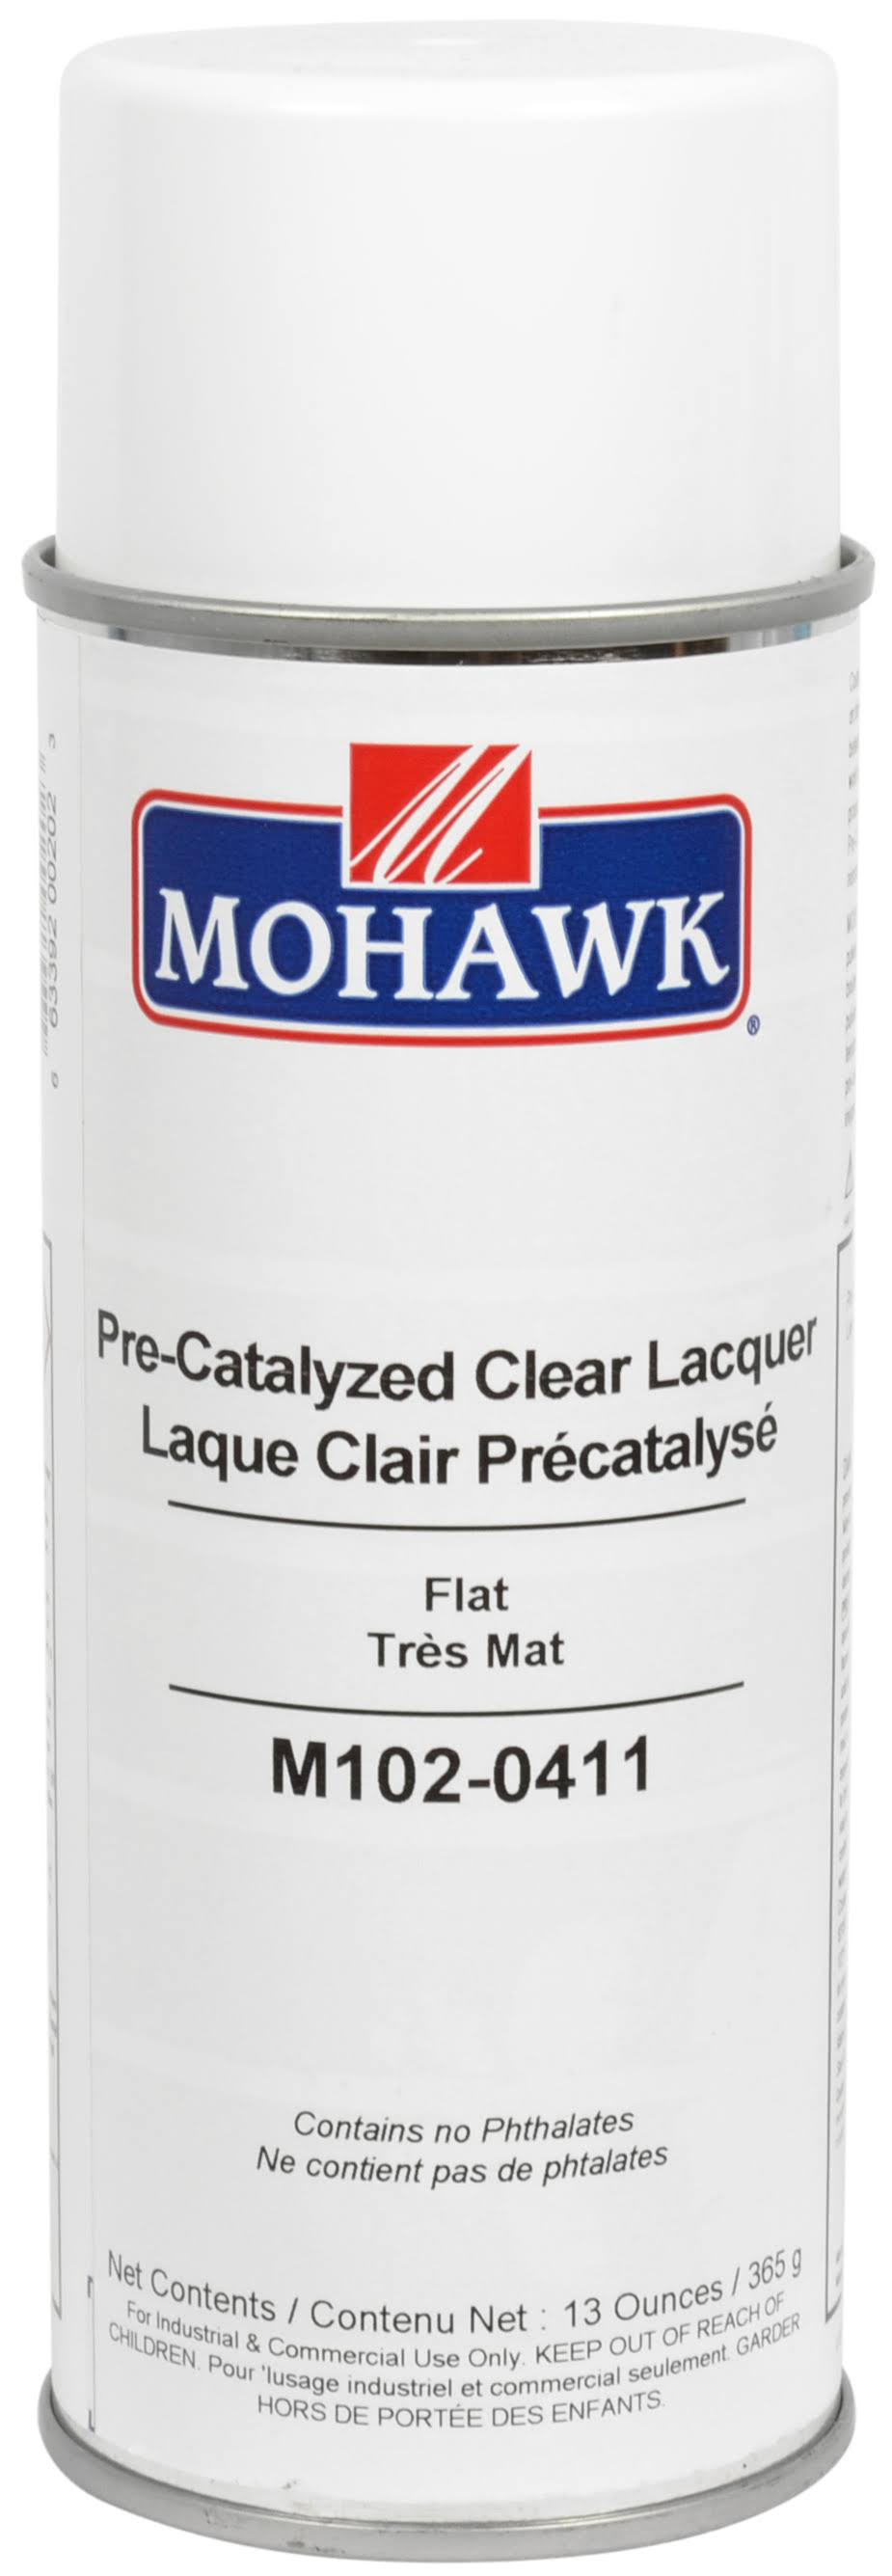 Mohawk Finishing Products Pre-Catalyzed Clear Lacquer Dead Flat